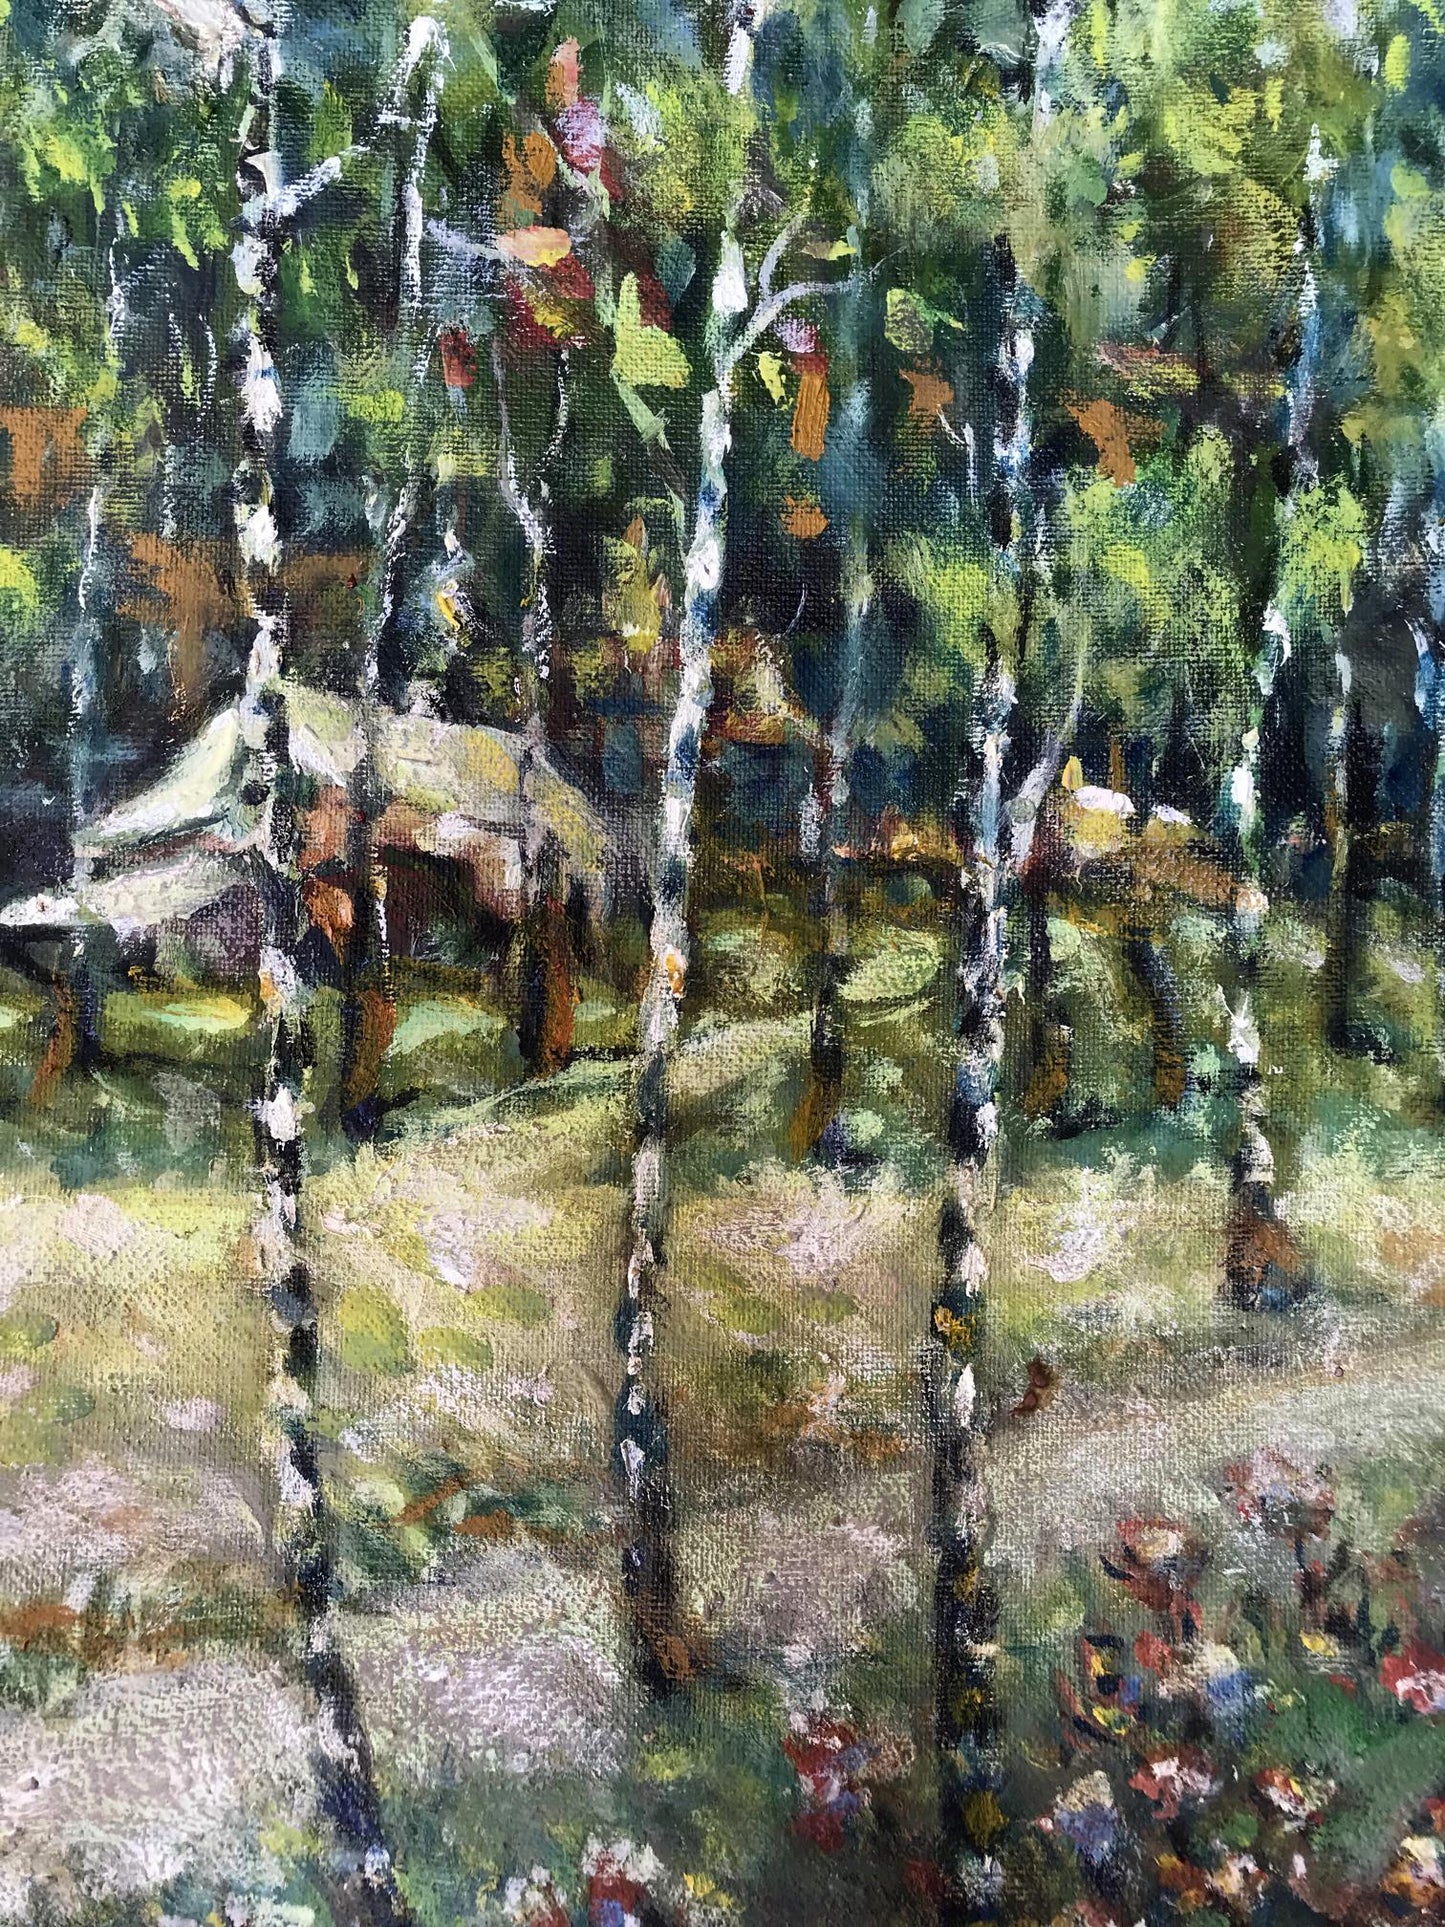 In the oil painting by Ivan Leontyevich Shapoval, Sumy's birches are beautifully portrayed